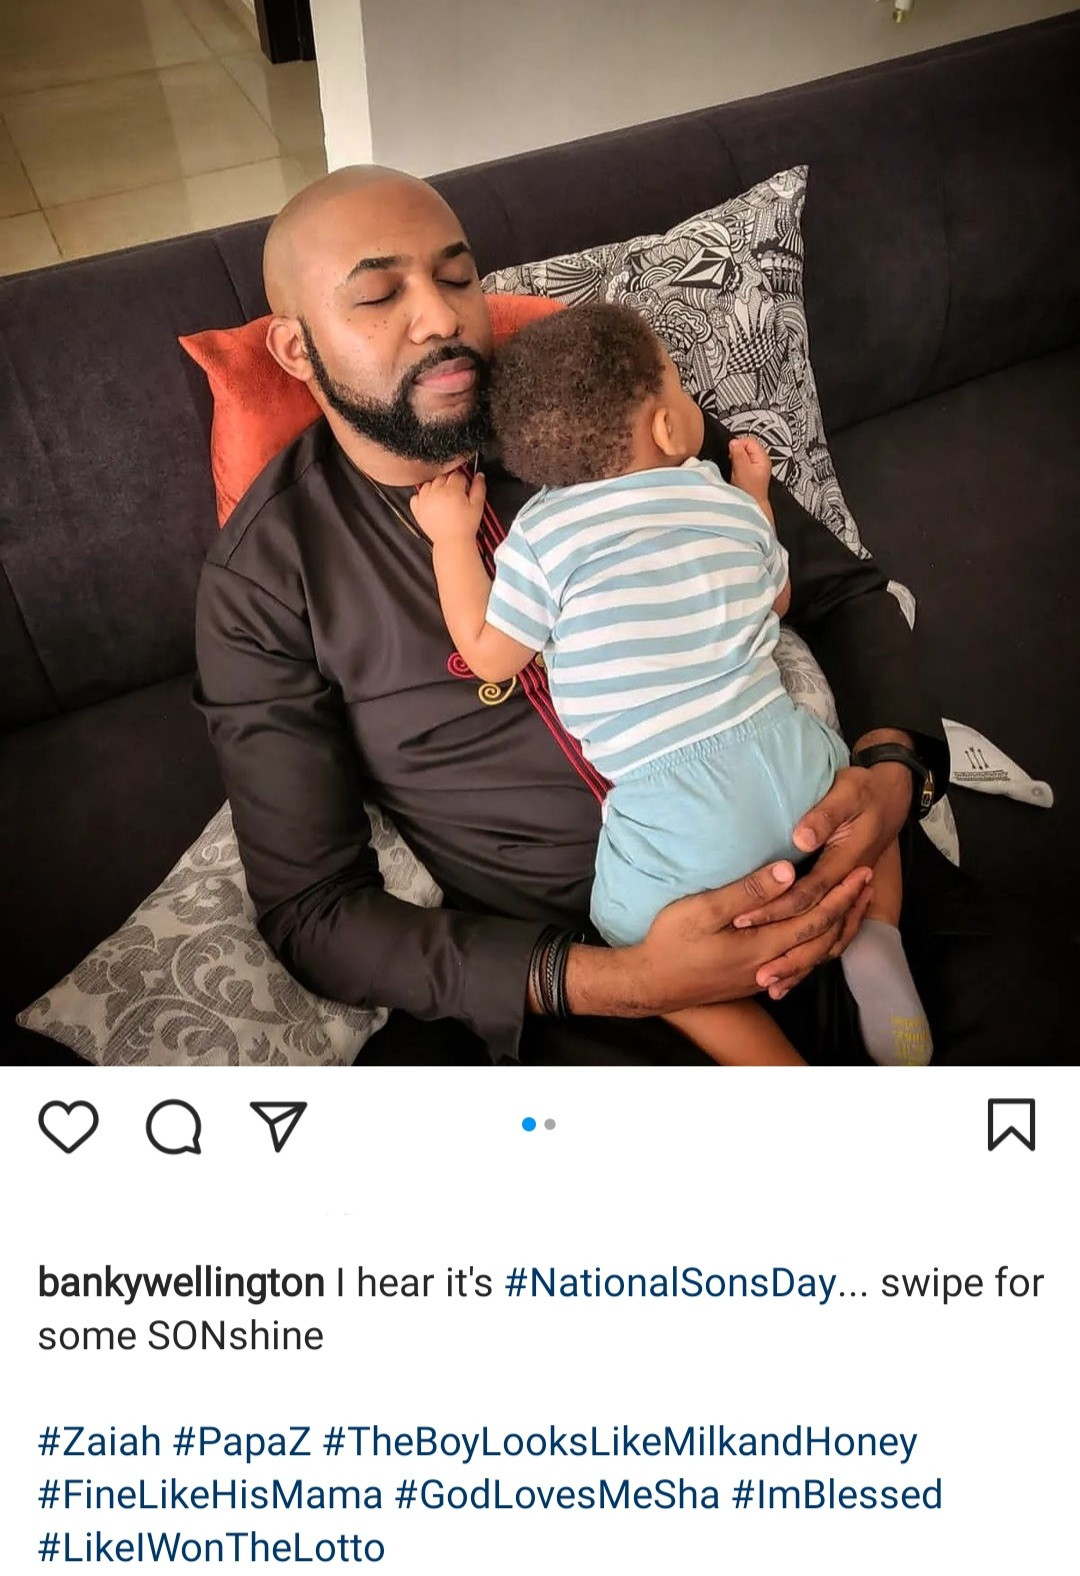 Banky W shares photos of his first son says "The boy looks like milk and honey"